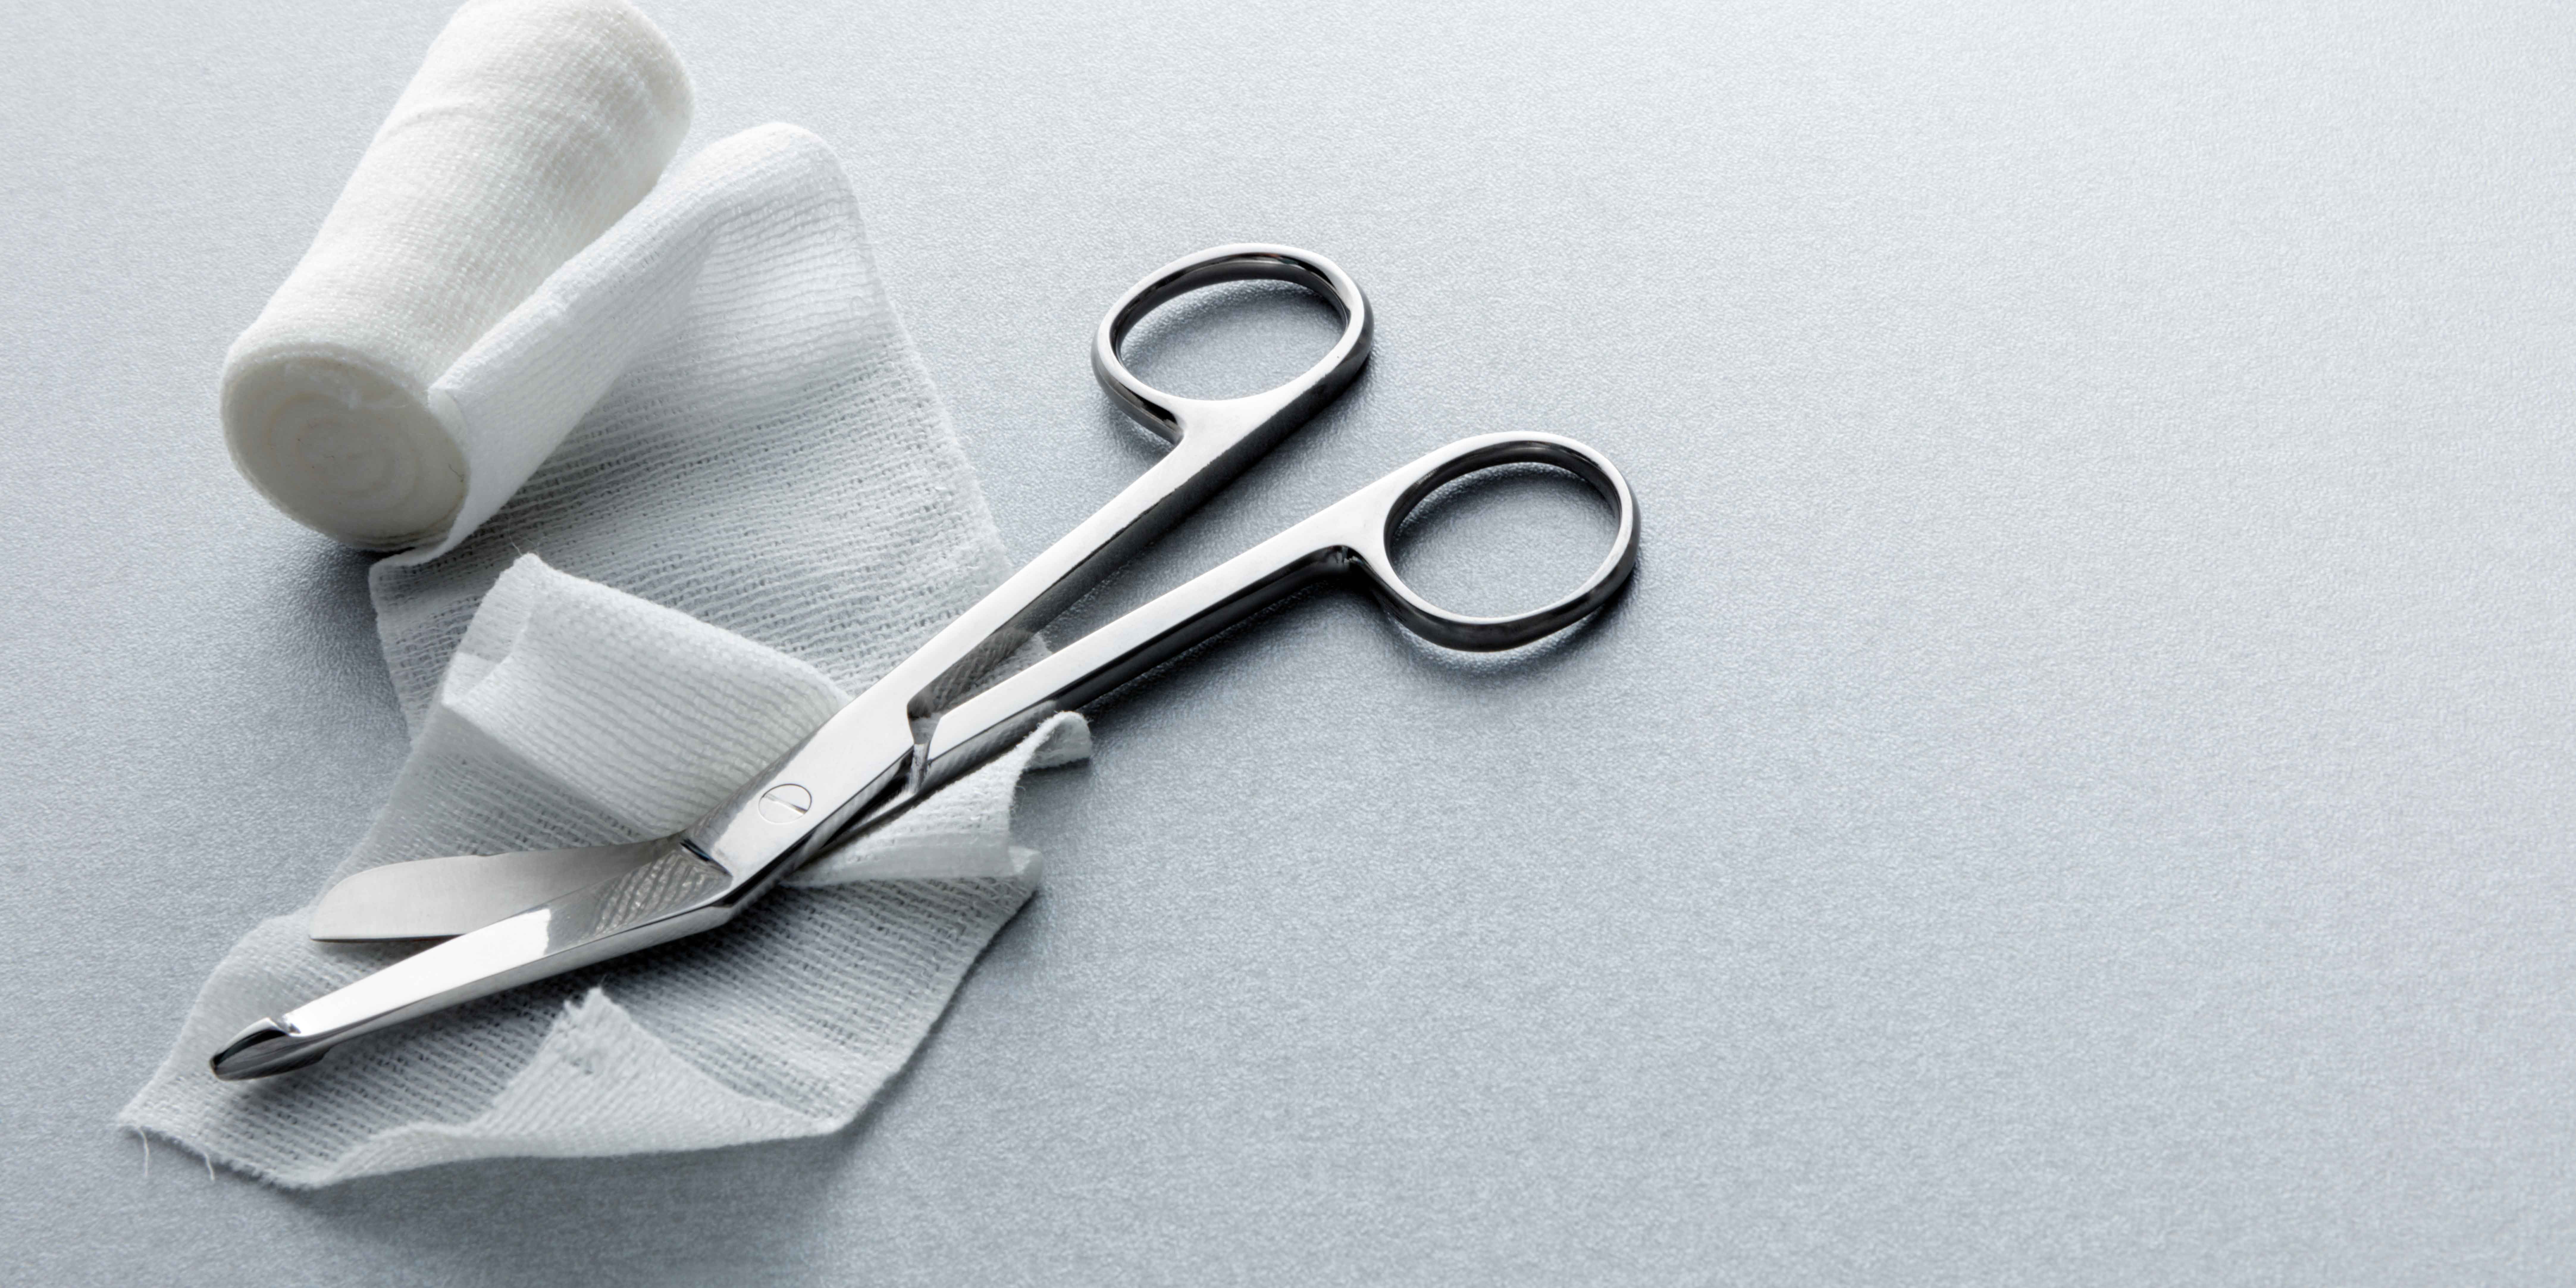 Gauze and surgical scissors sit on a desk.